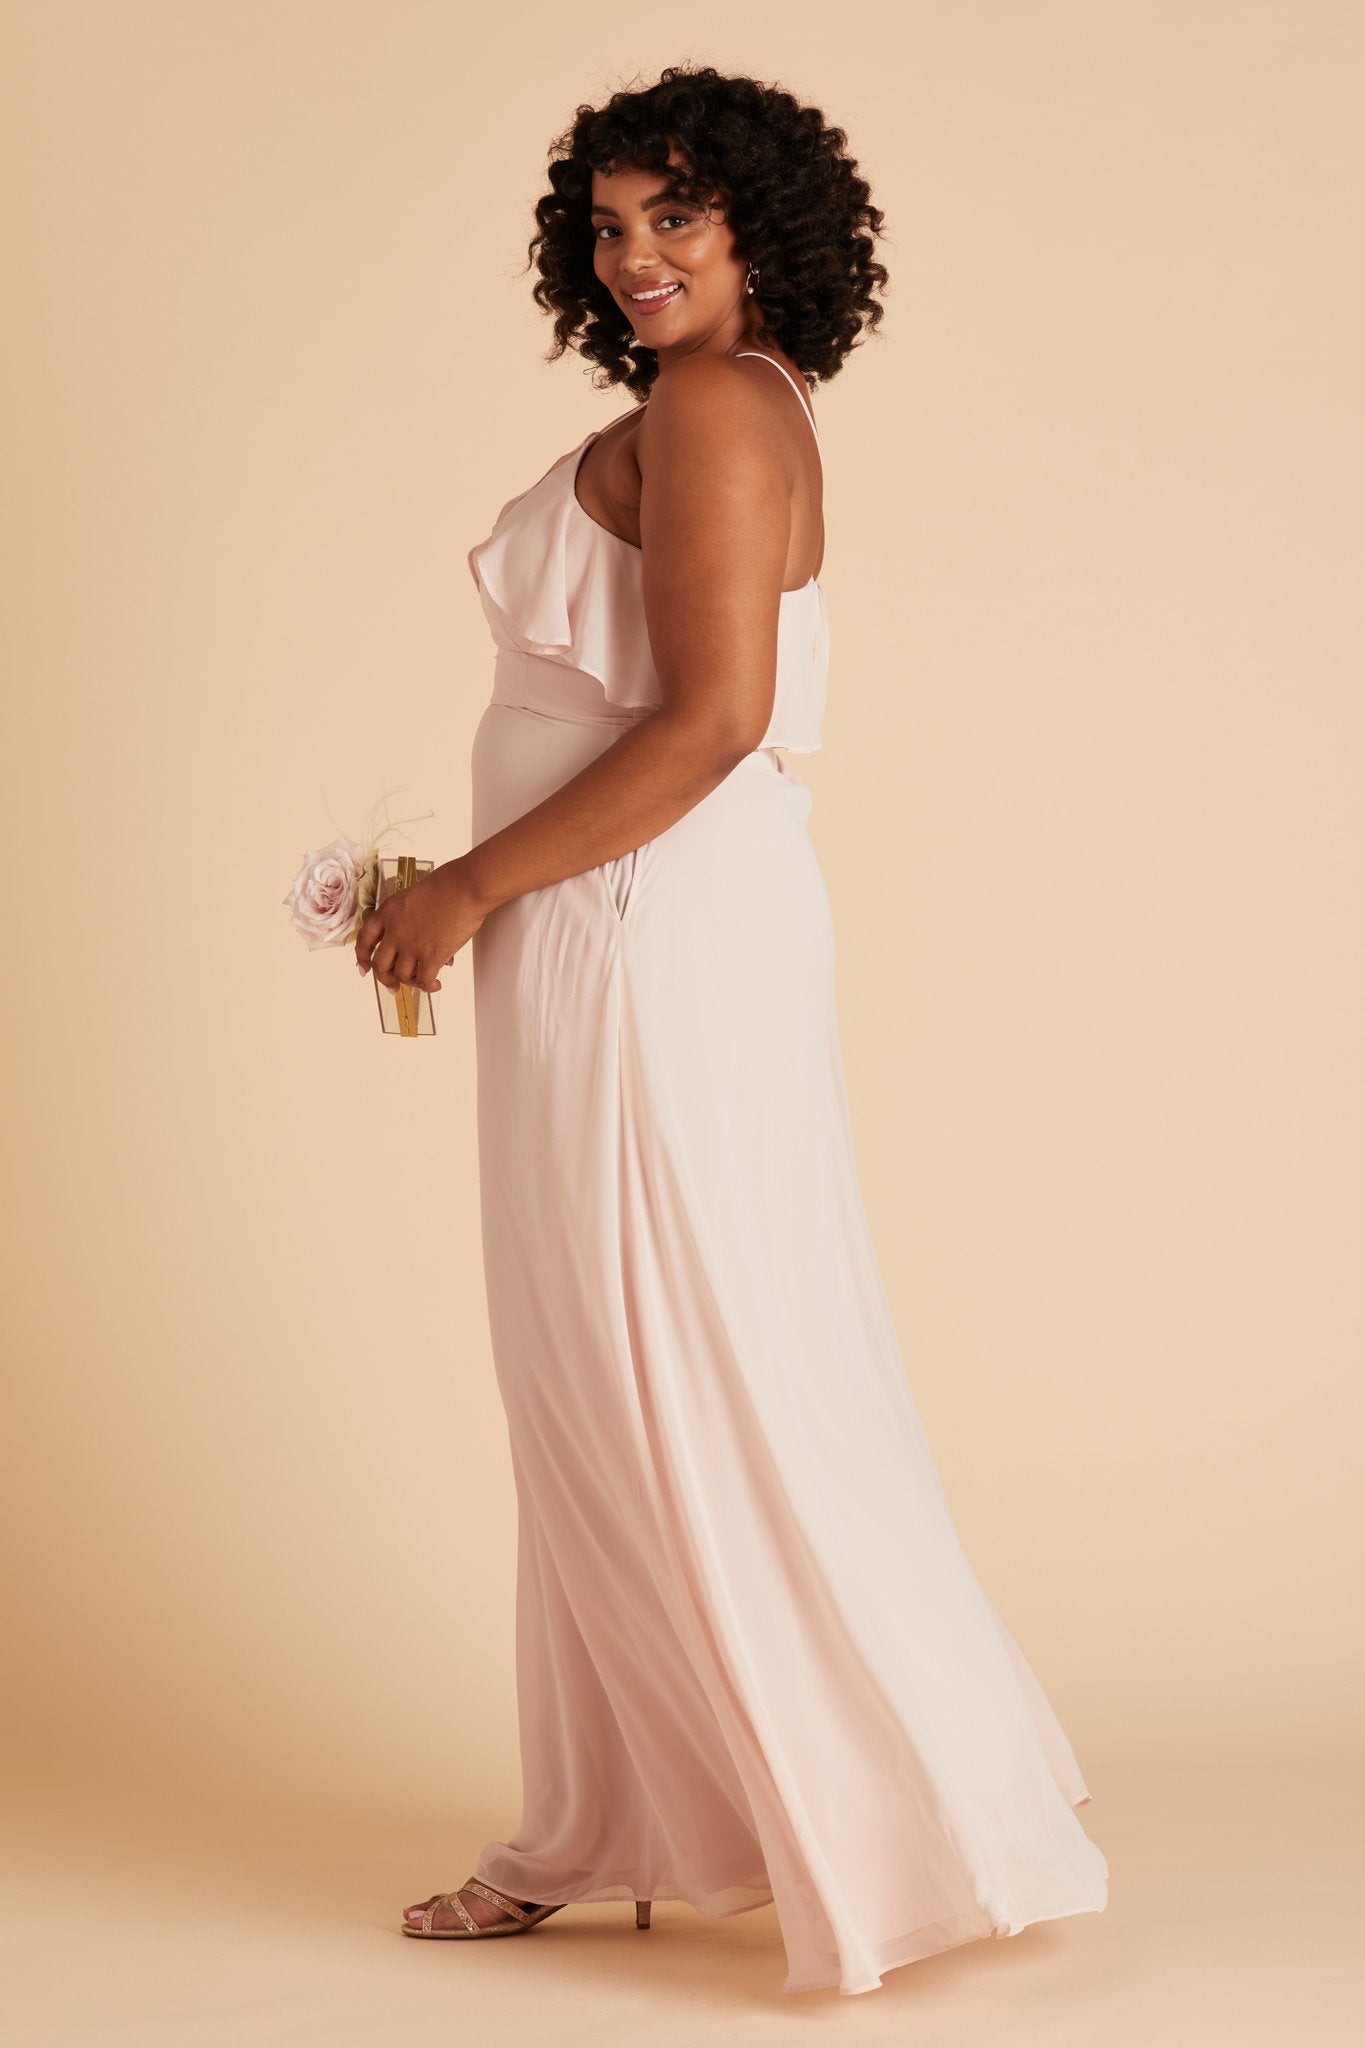 Jules plus size bridesmaid dress in pale blush chiffon by Birdy Grey, side view